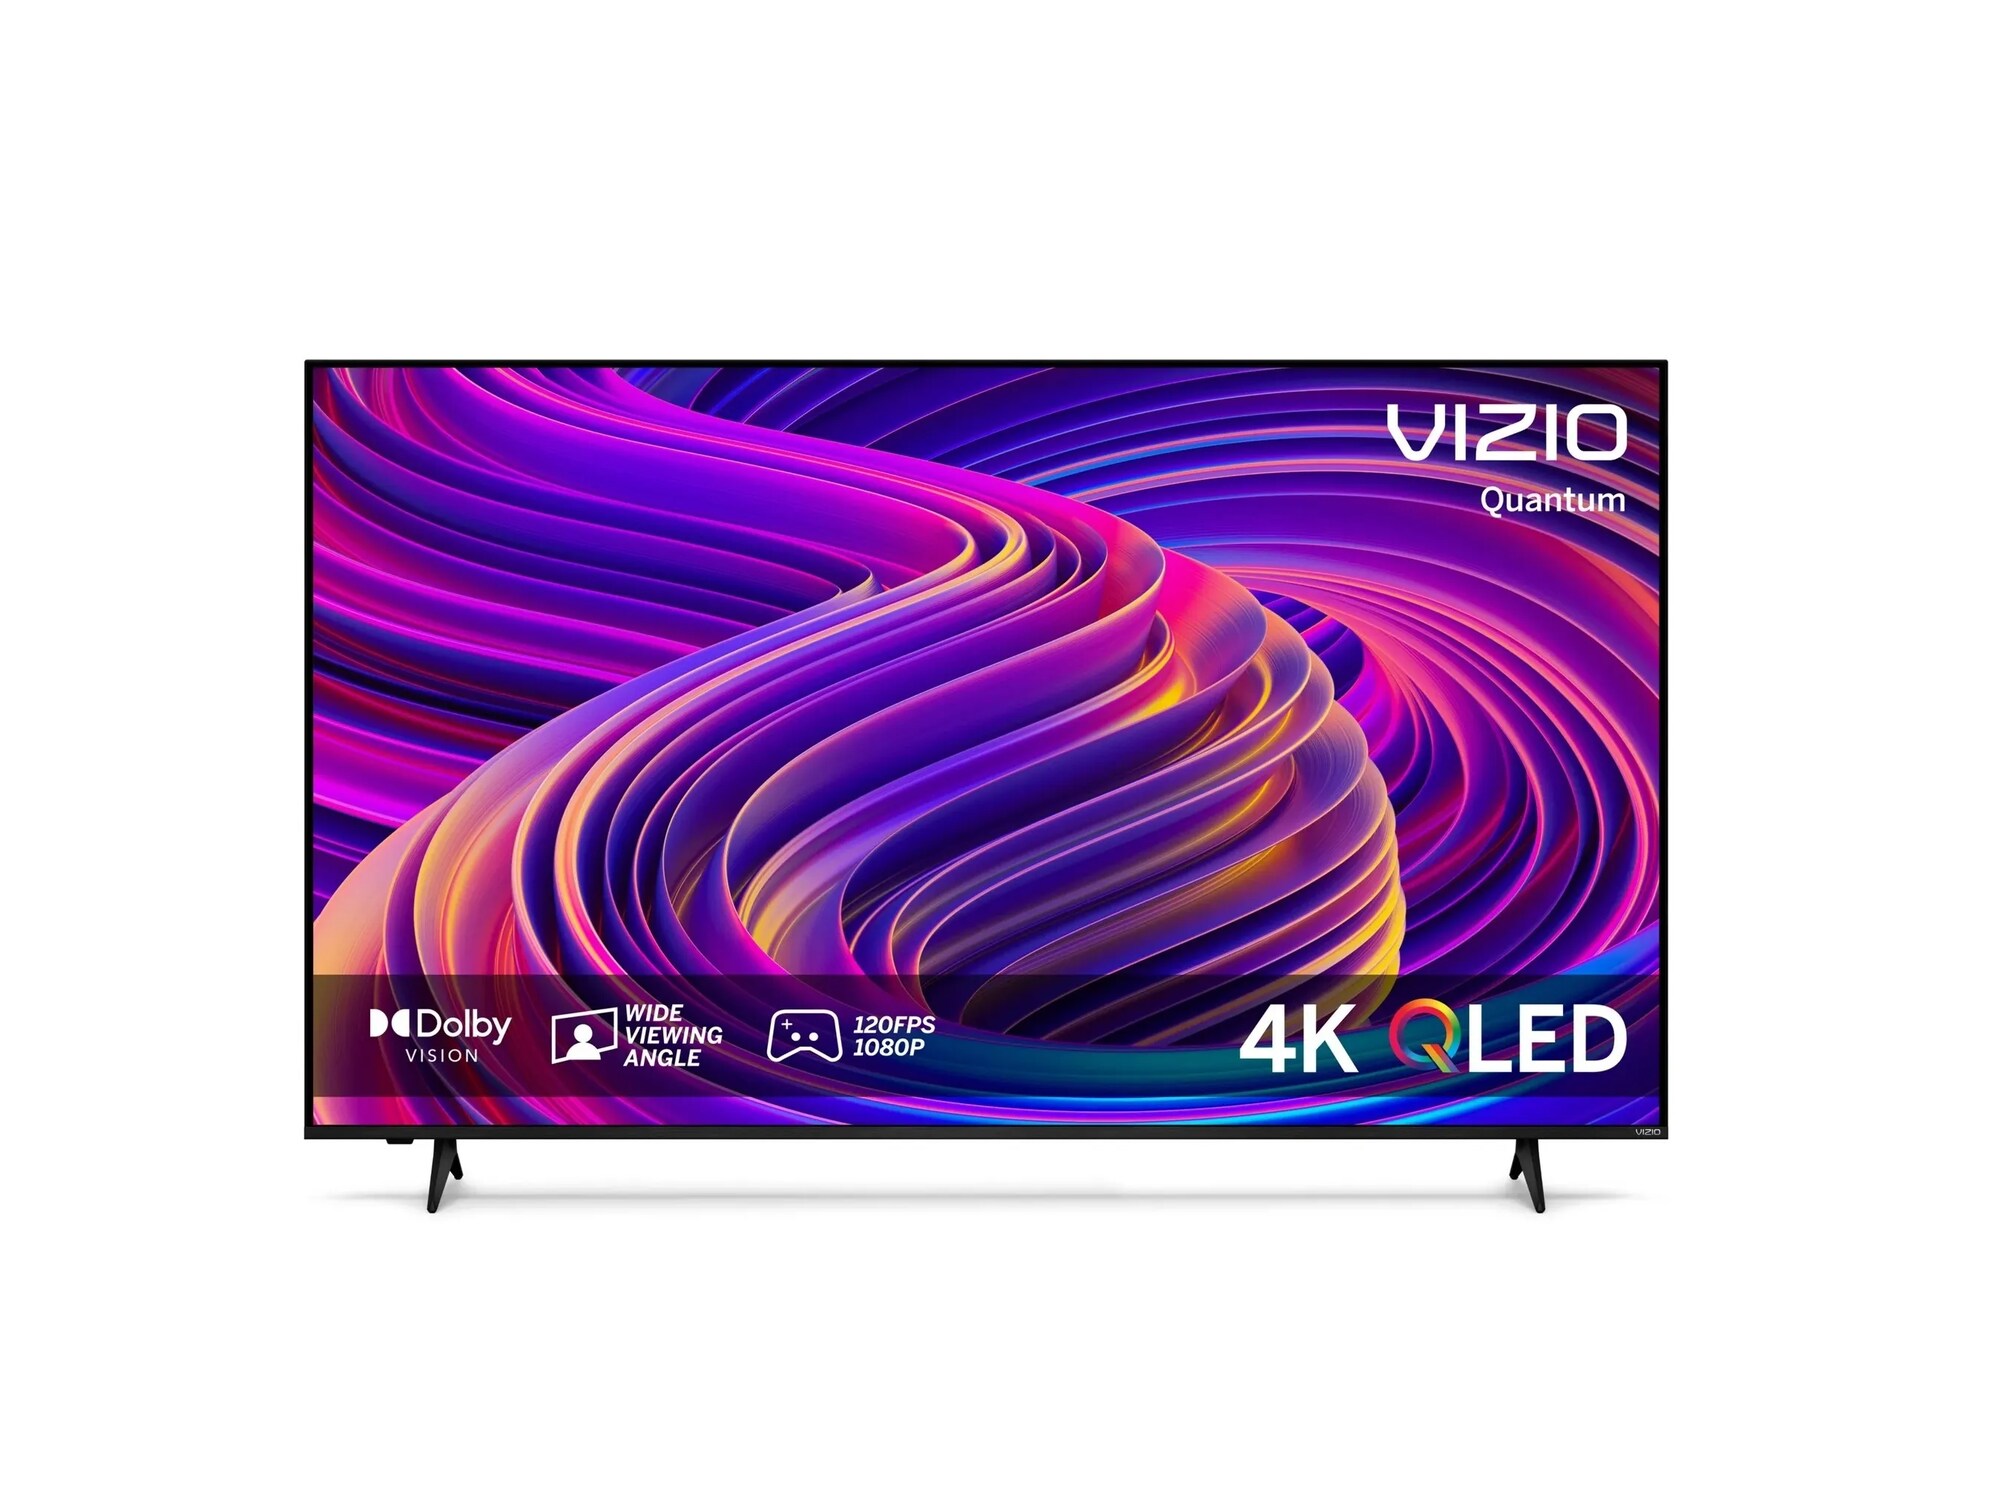 Why Should You Purchase A Vizio QLED TV